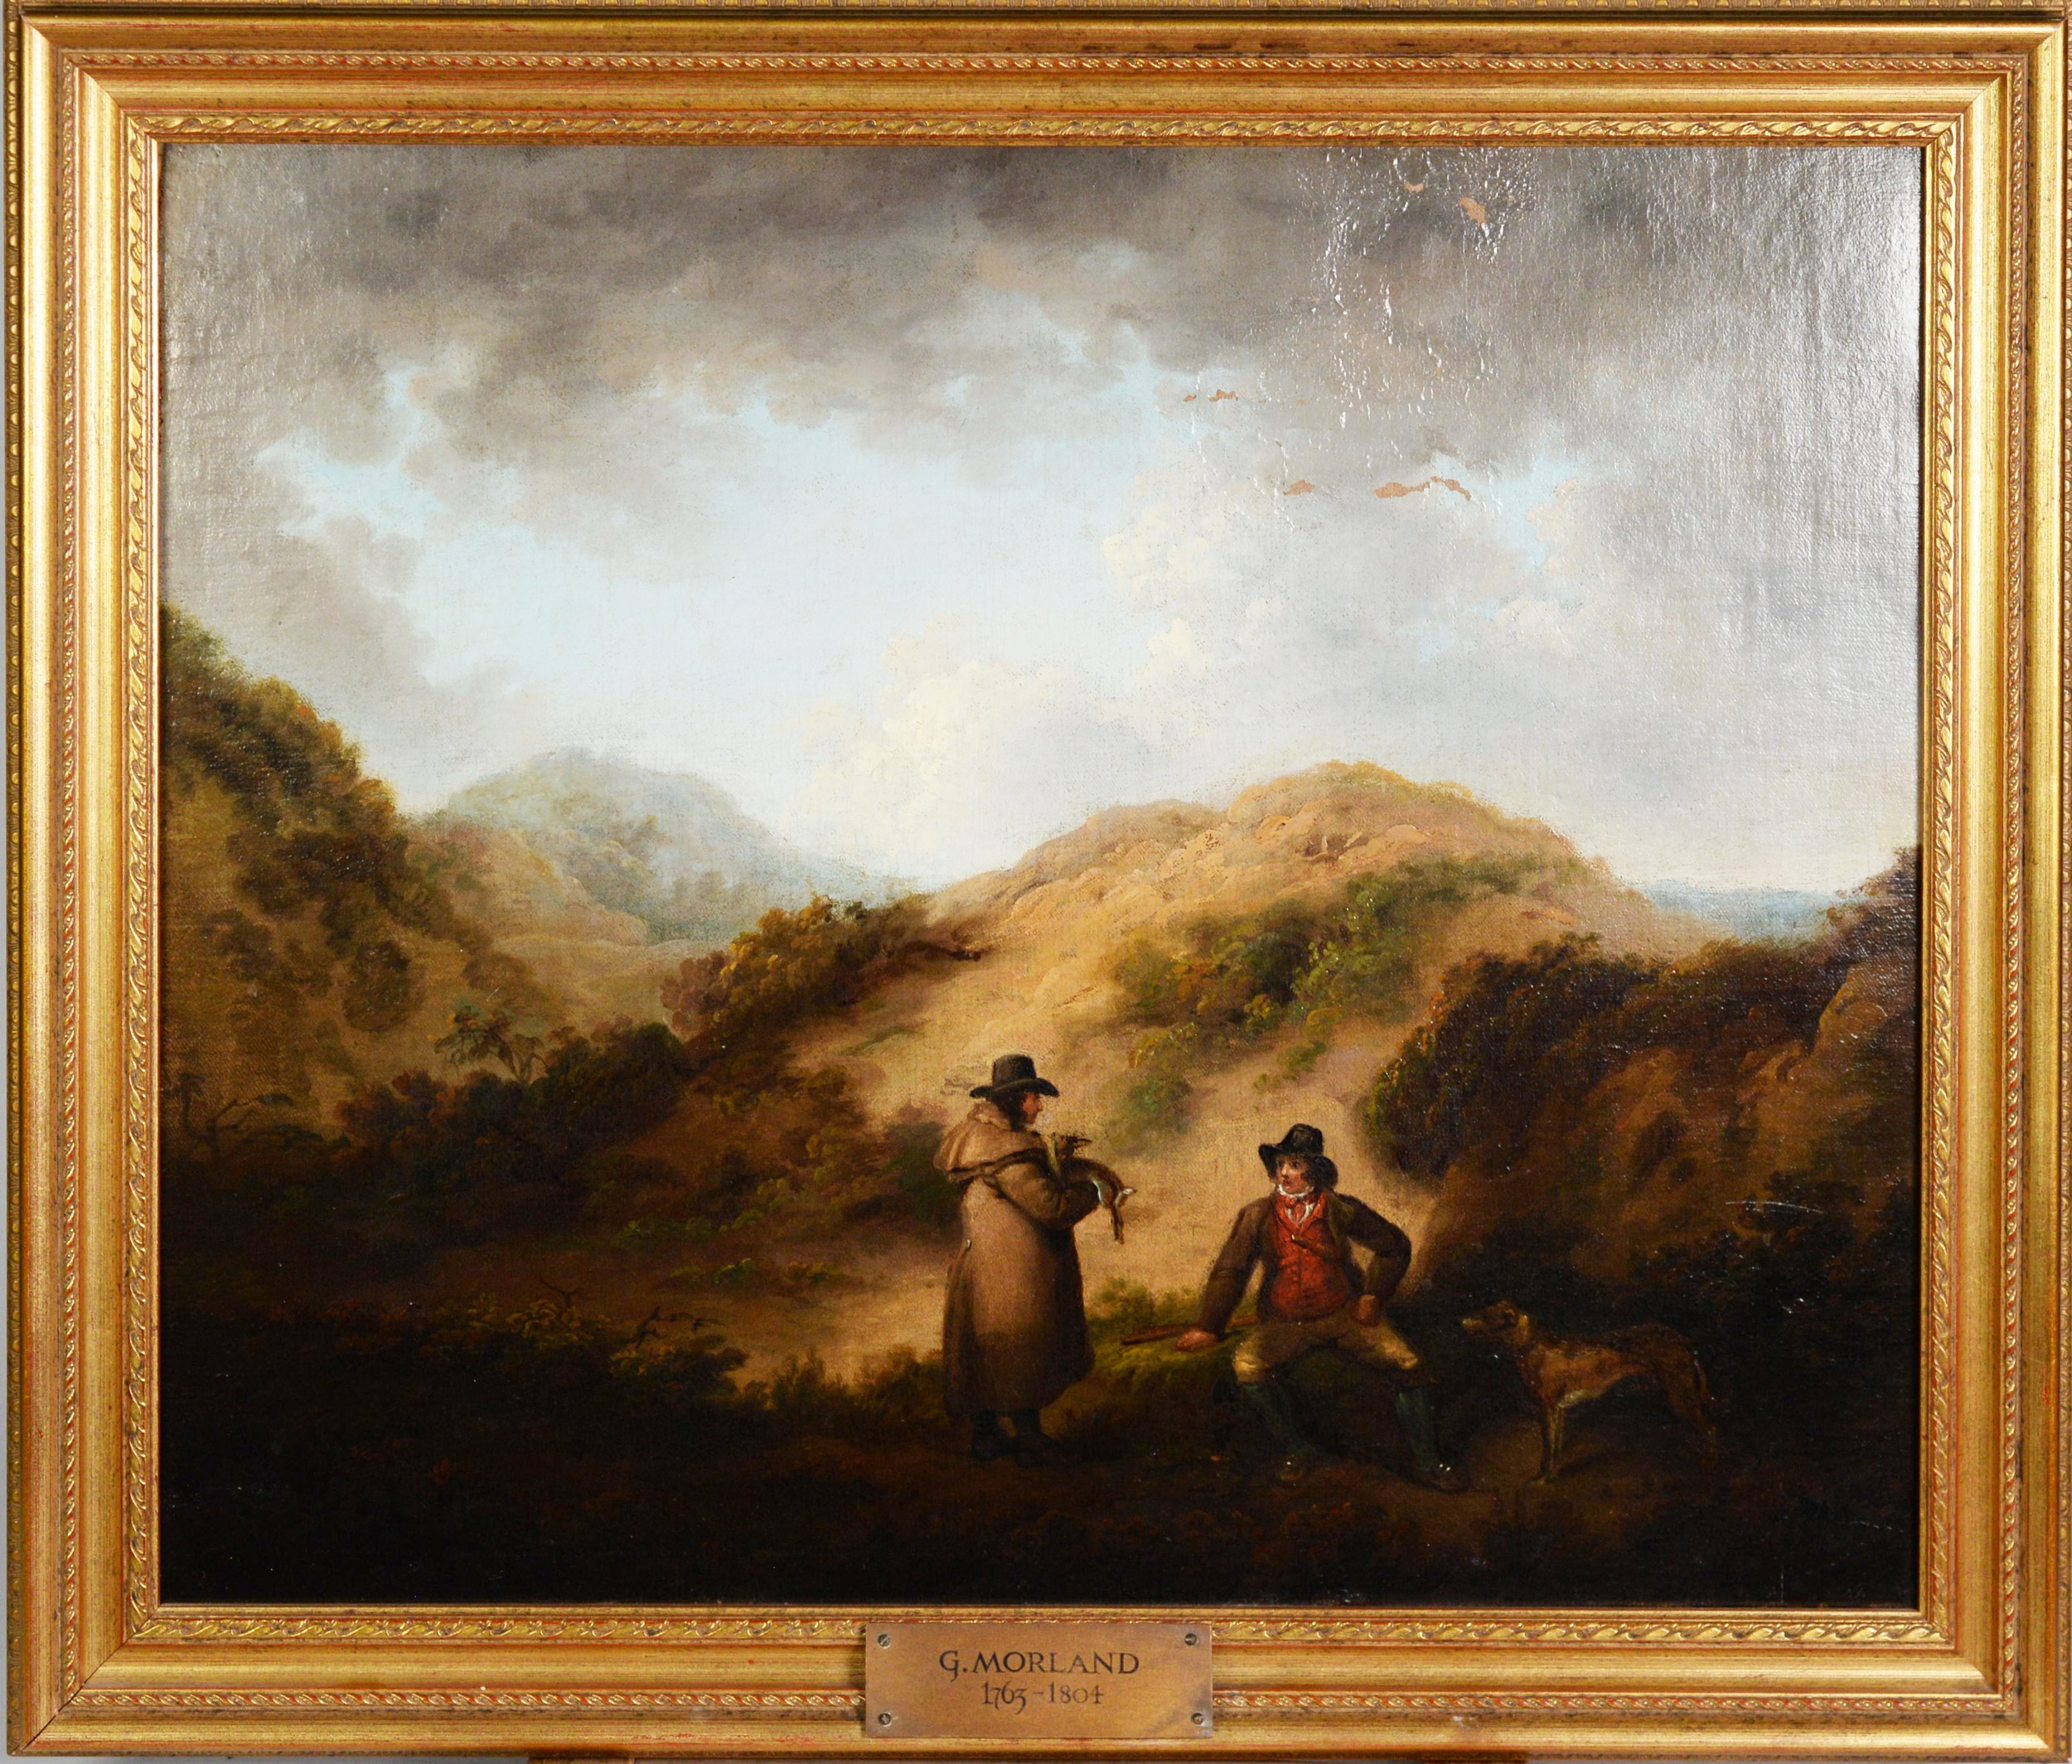 GEORGE MORLAND (1763-1804) OIL PAINTING ON RELINED CANVAS Landscape with two figures - Image 6 of 6